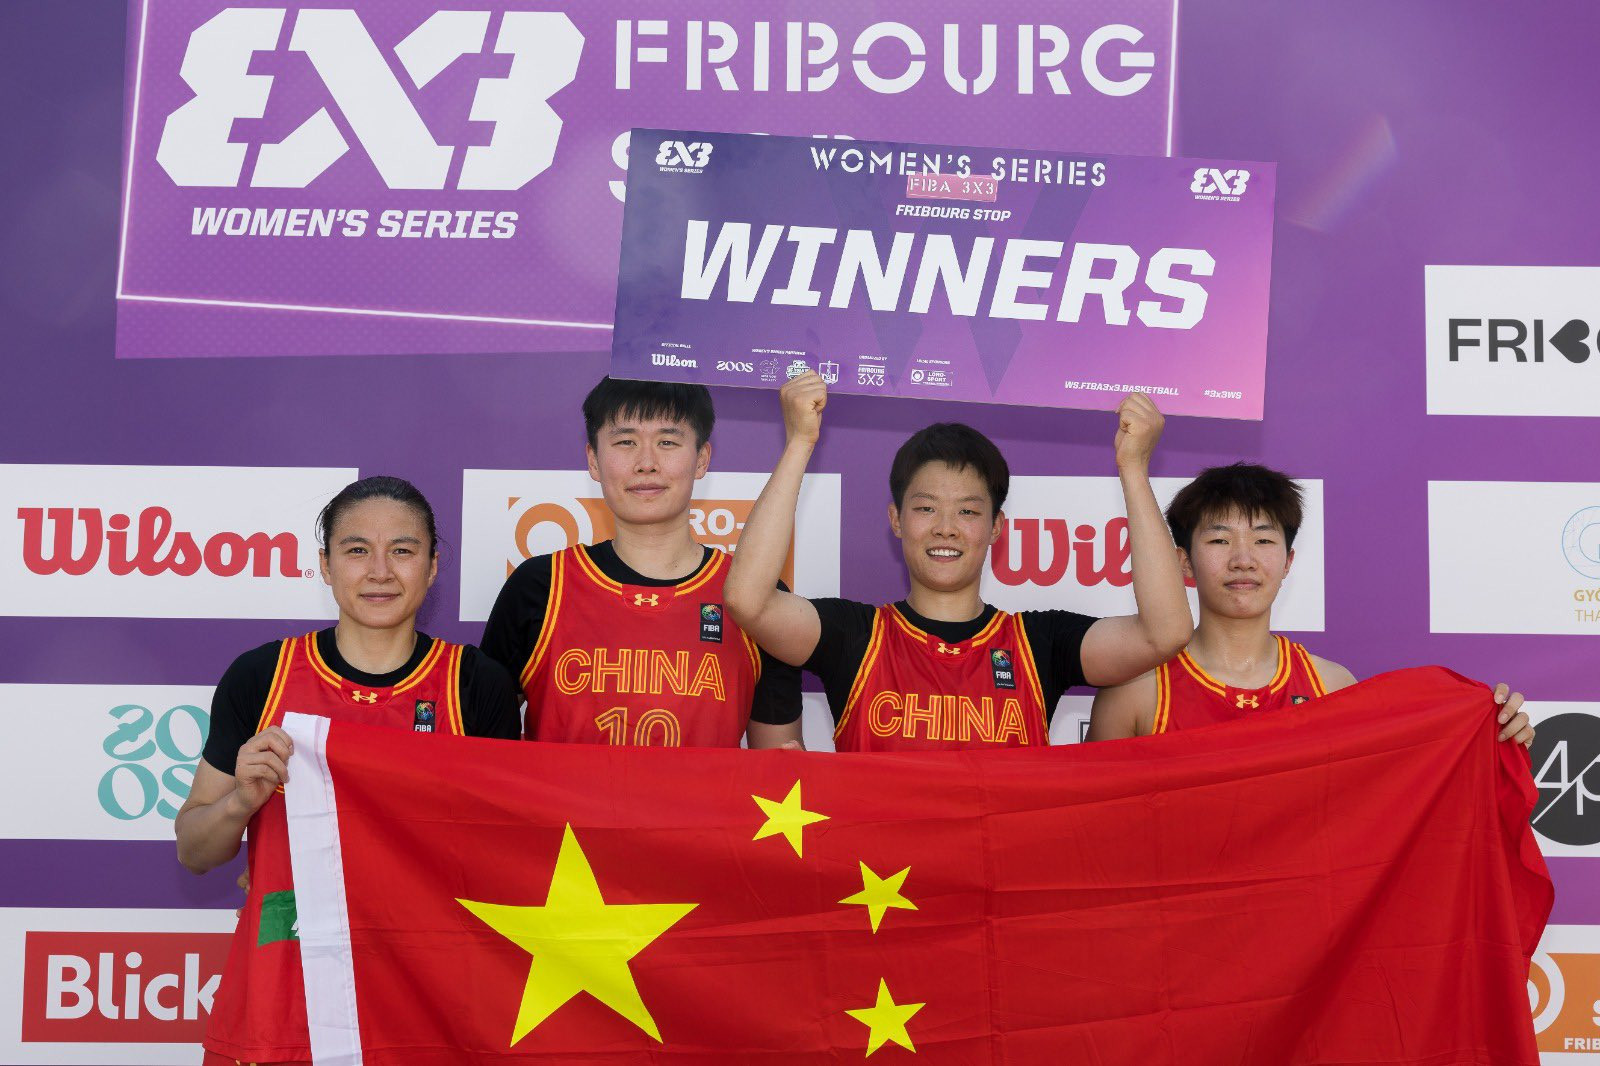 China continue to lead FIBA 3x3 Women's Series after win in Fribourg